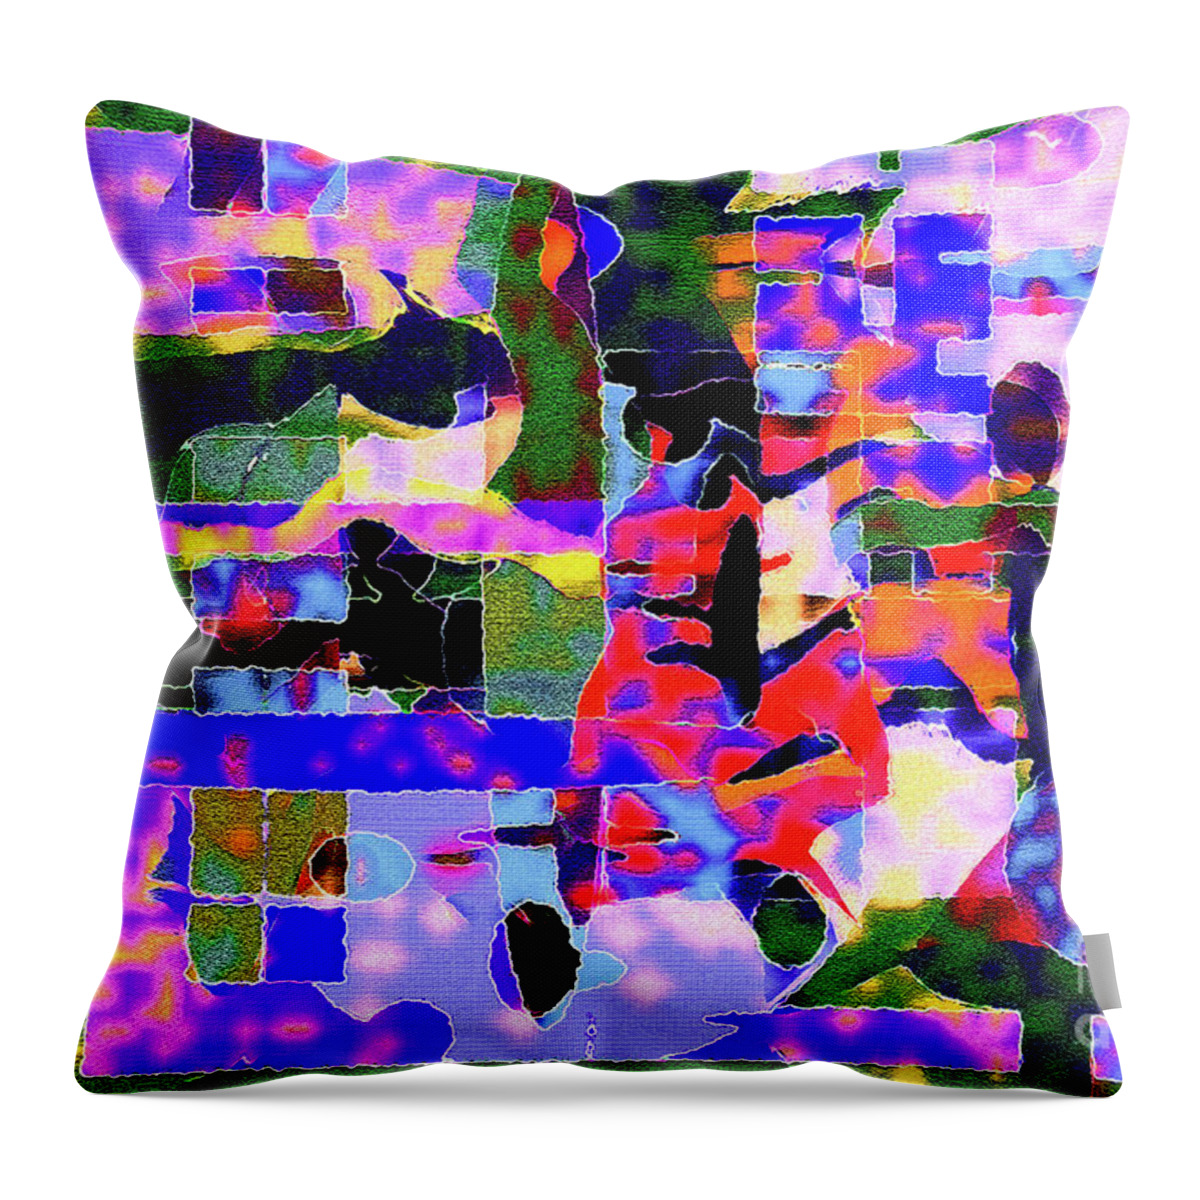 Green Throw Pillow featuring the photograph Abstract Sports Montage by Andee Design